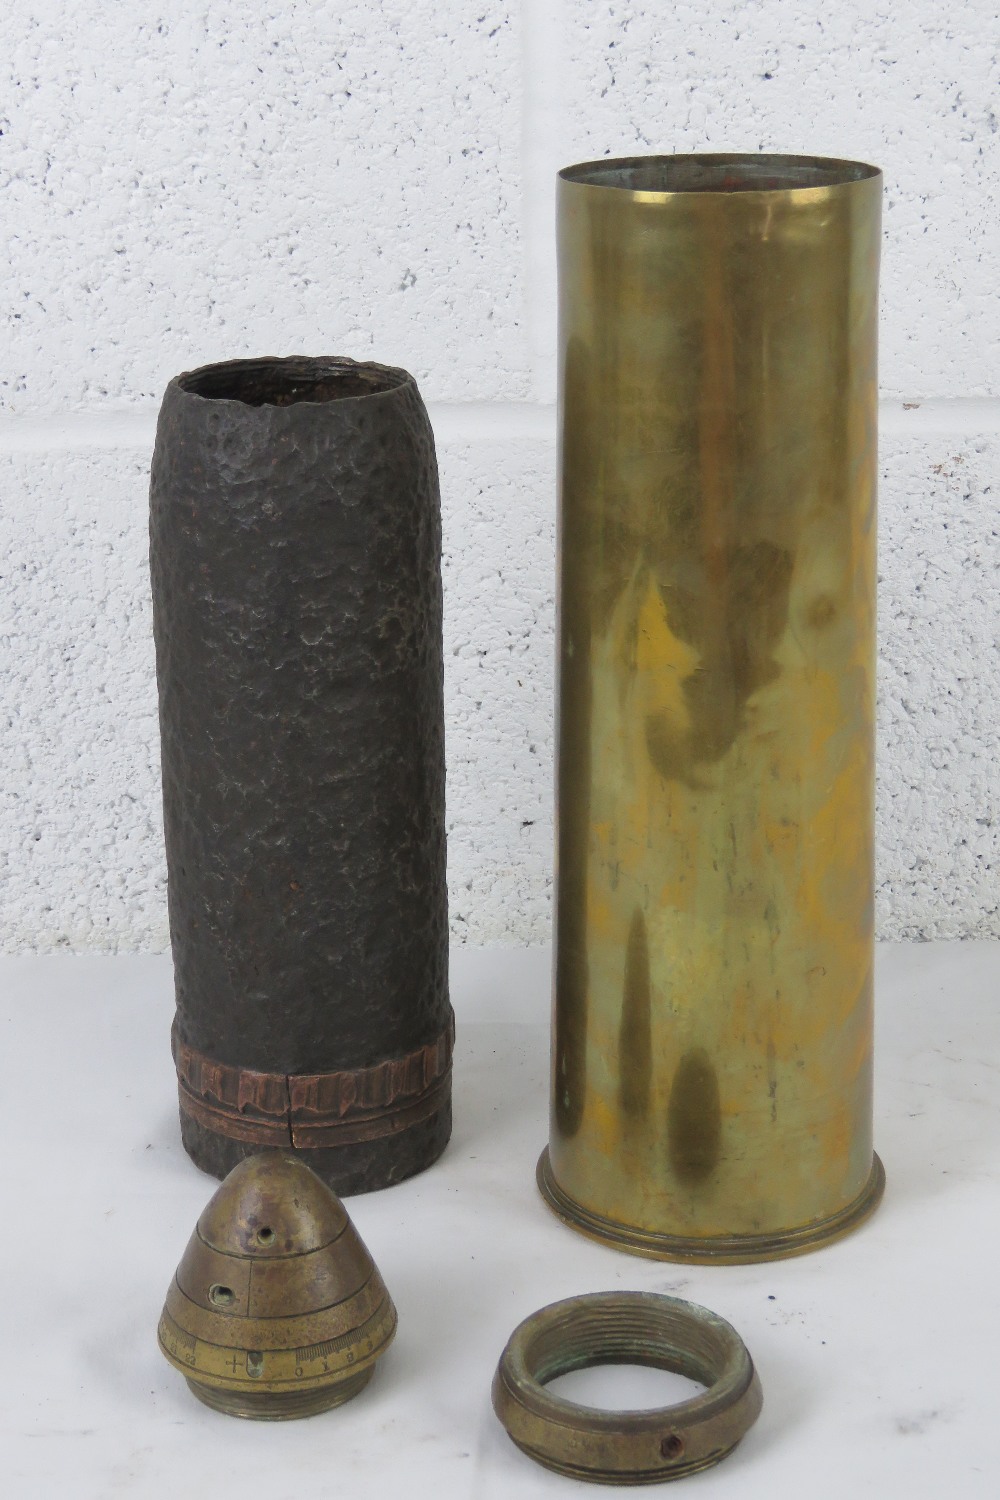 A British 18pr shell dated 1918 with head and fuse. - Image 2 of 4